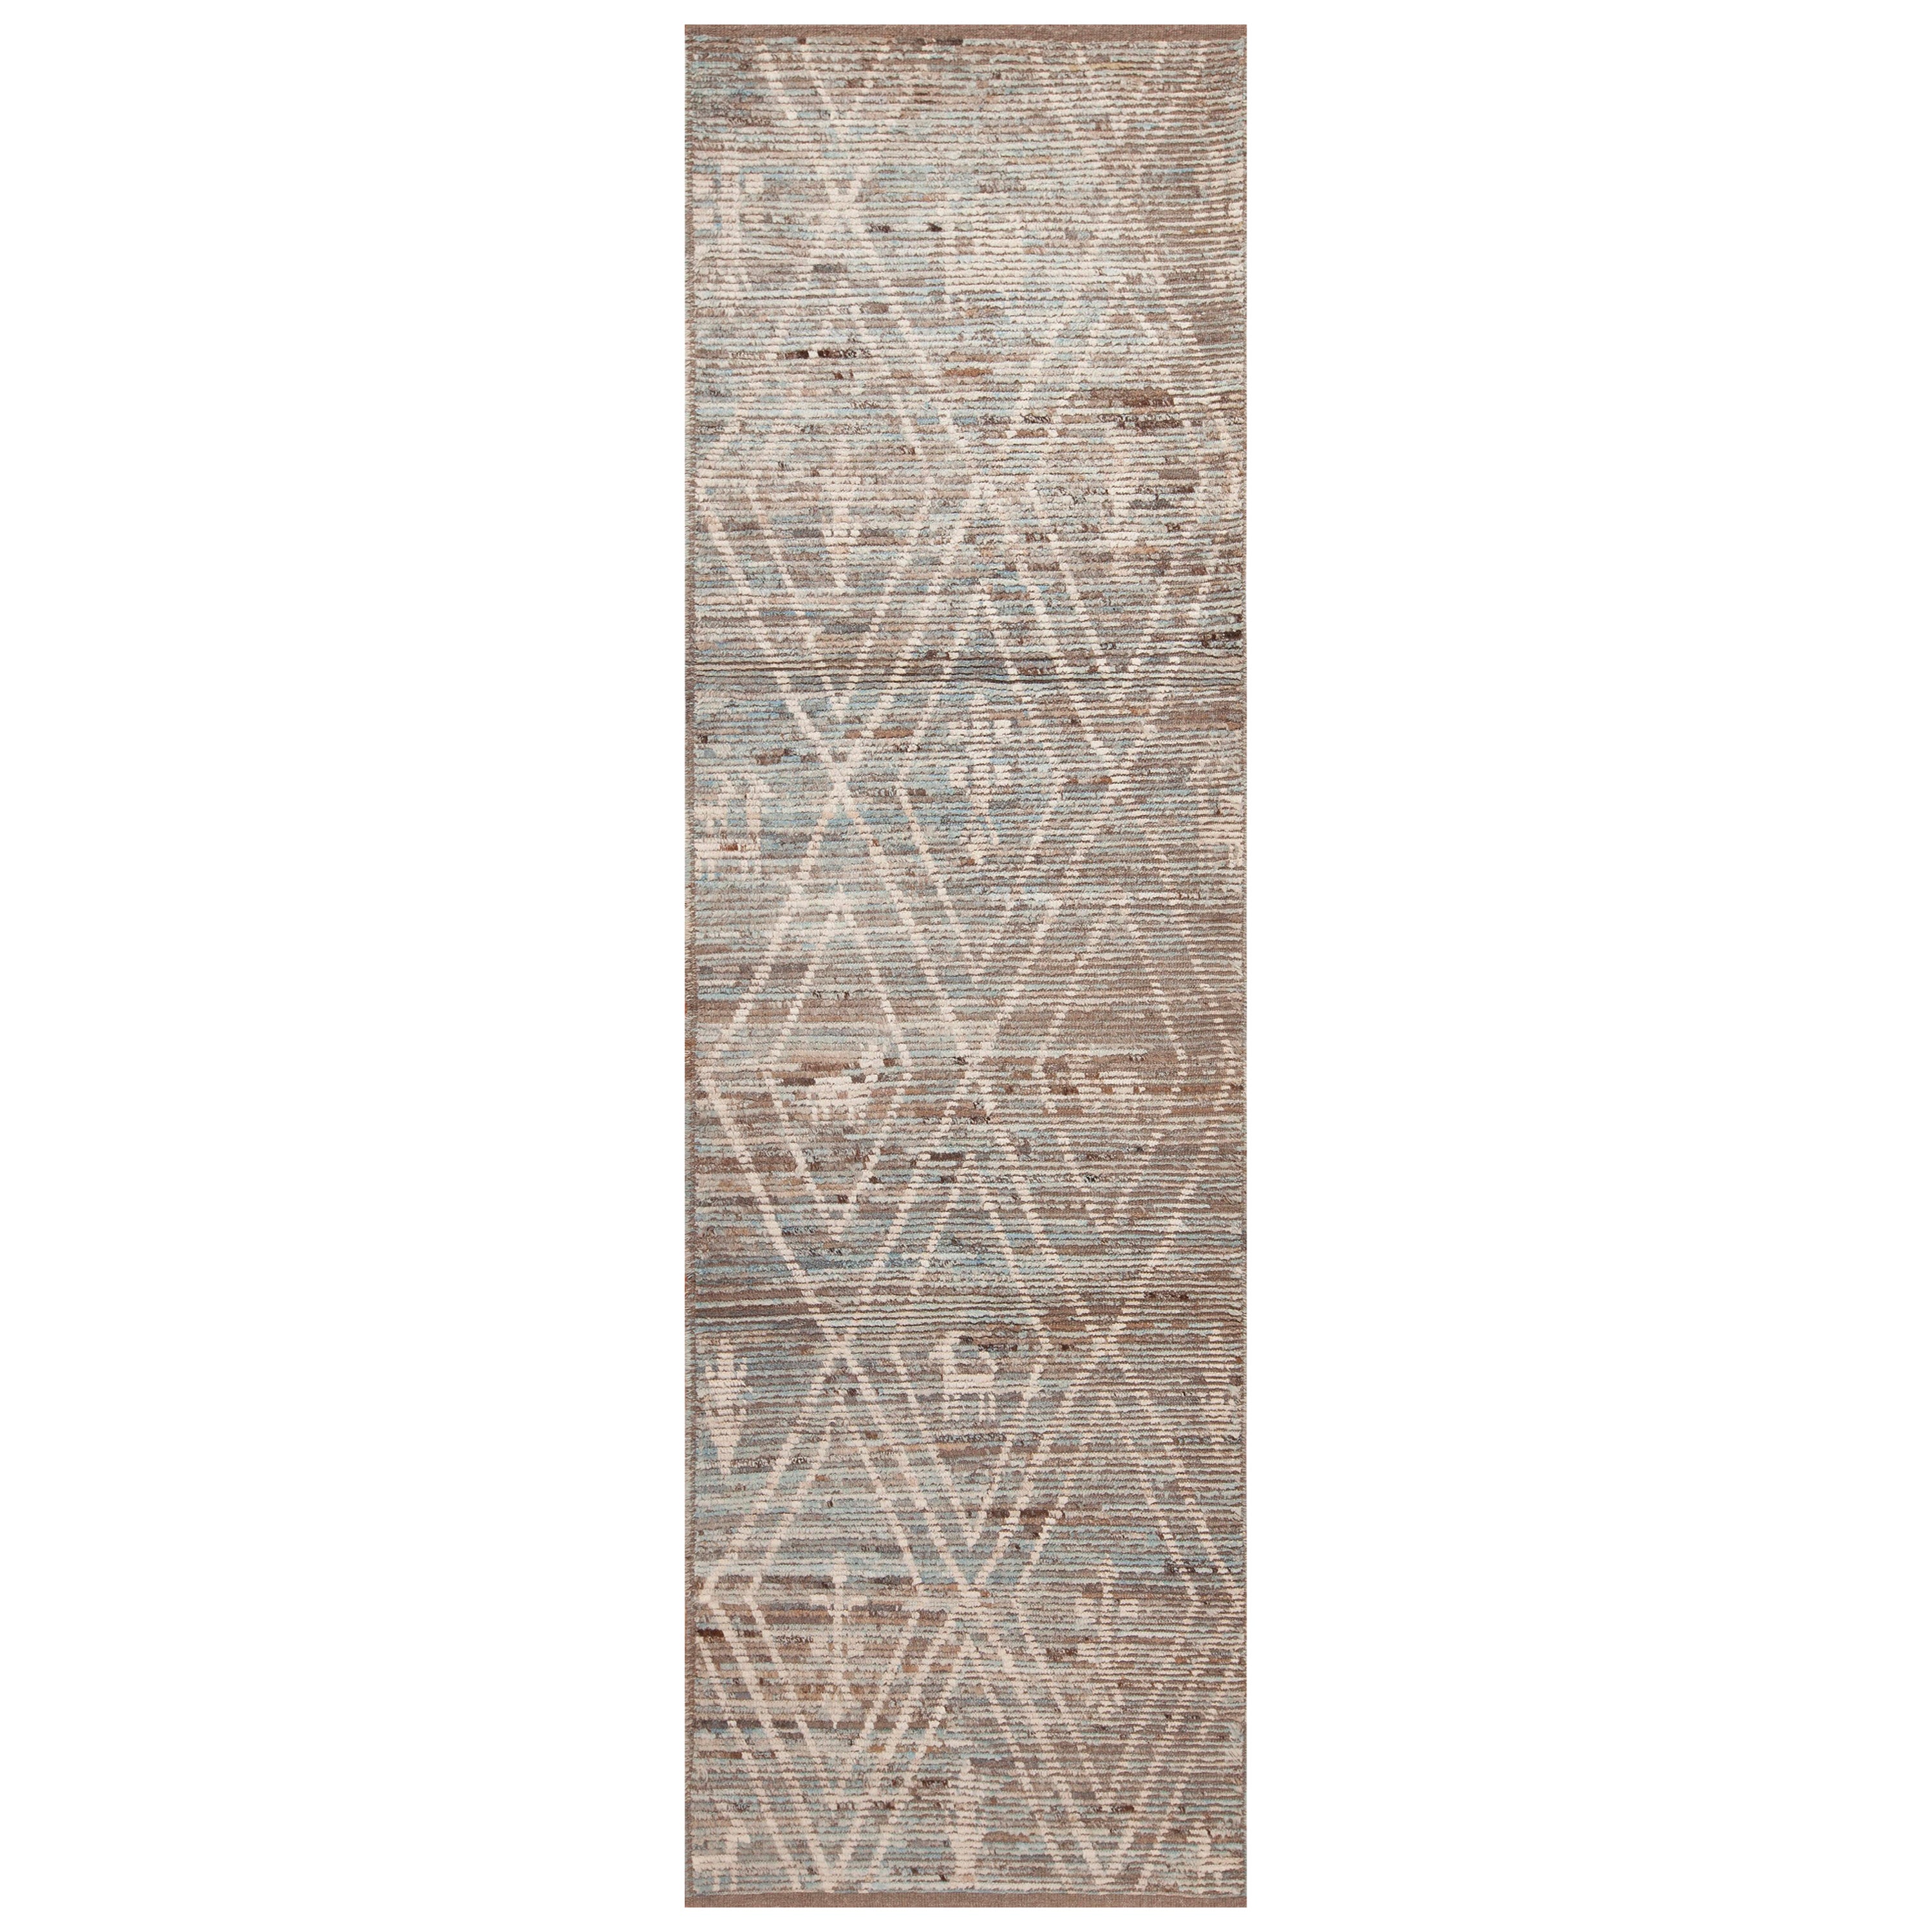 Nazmiyal Collection Neutral Color and Tribal Geometric Modern Rug 3'5" x 11'5"